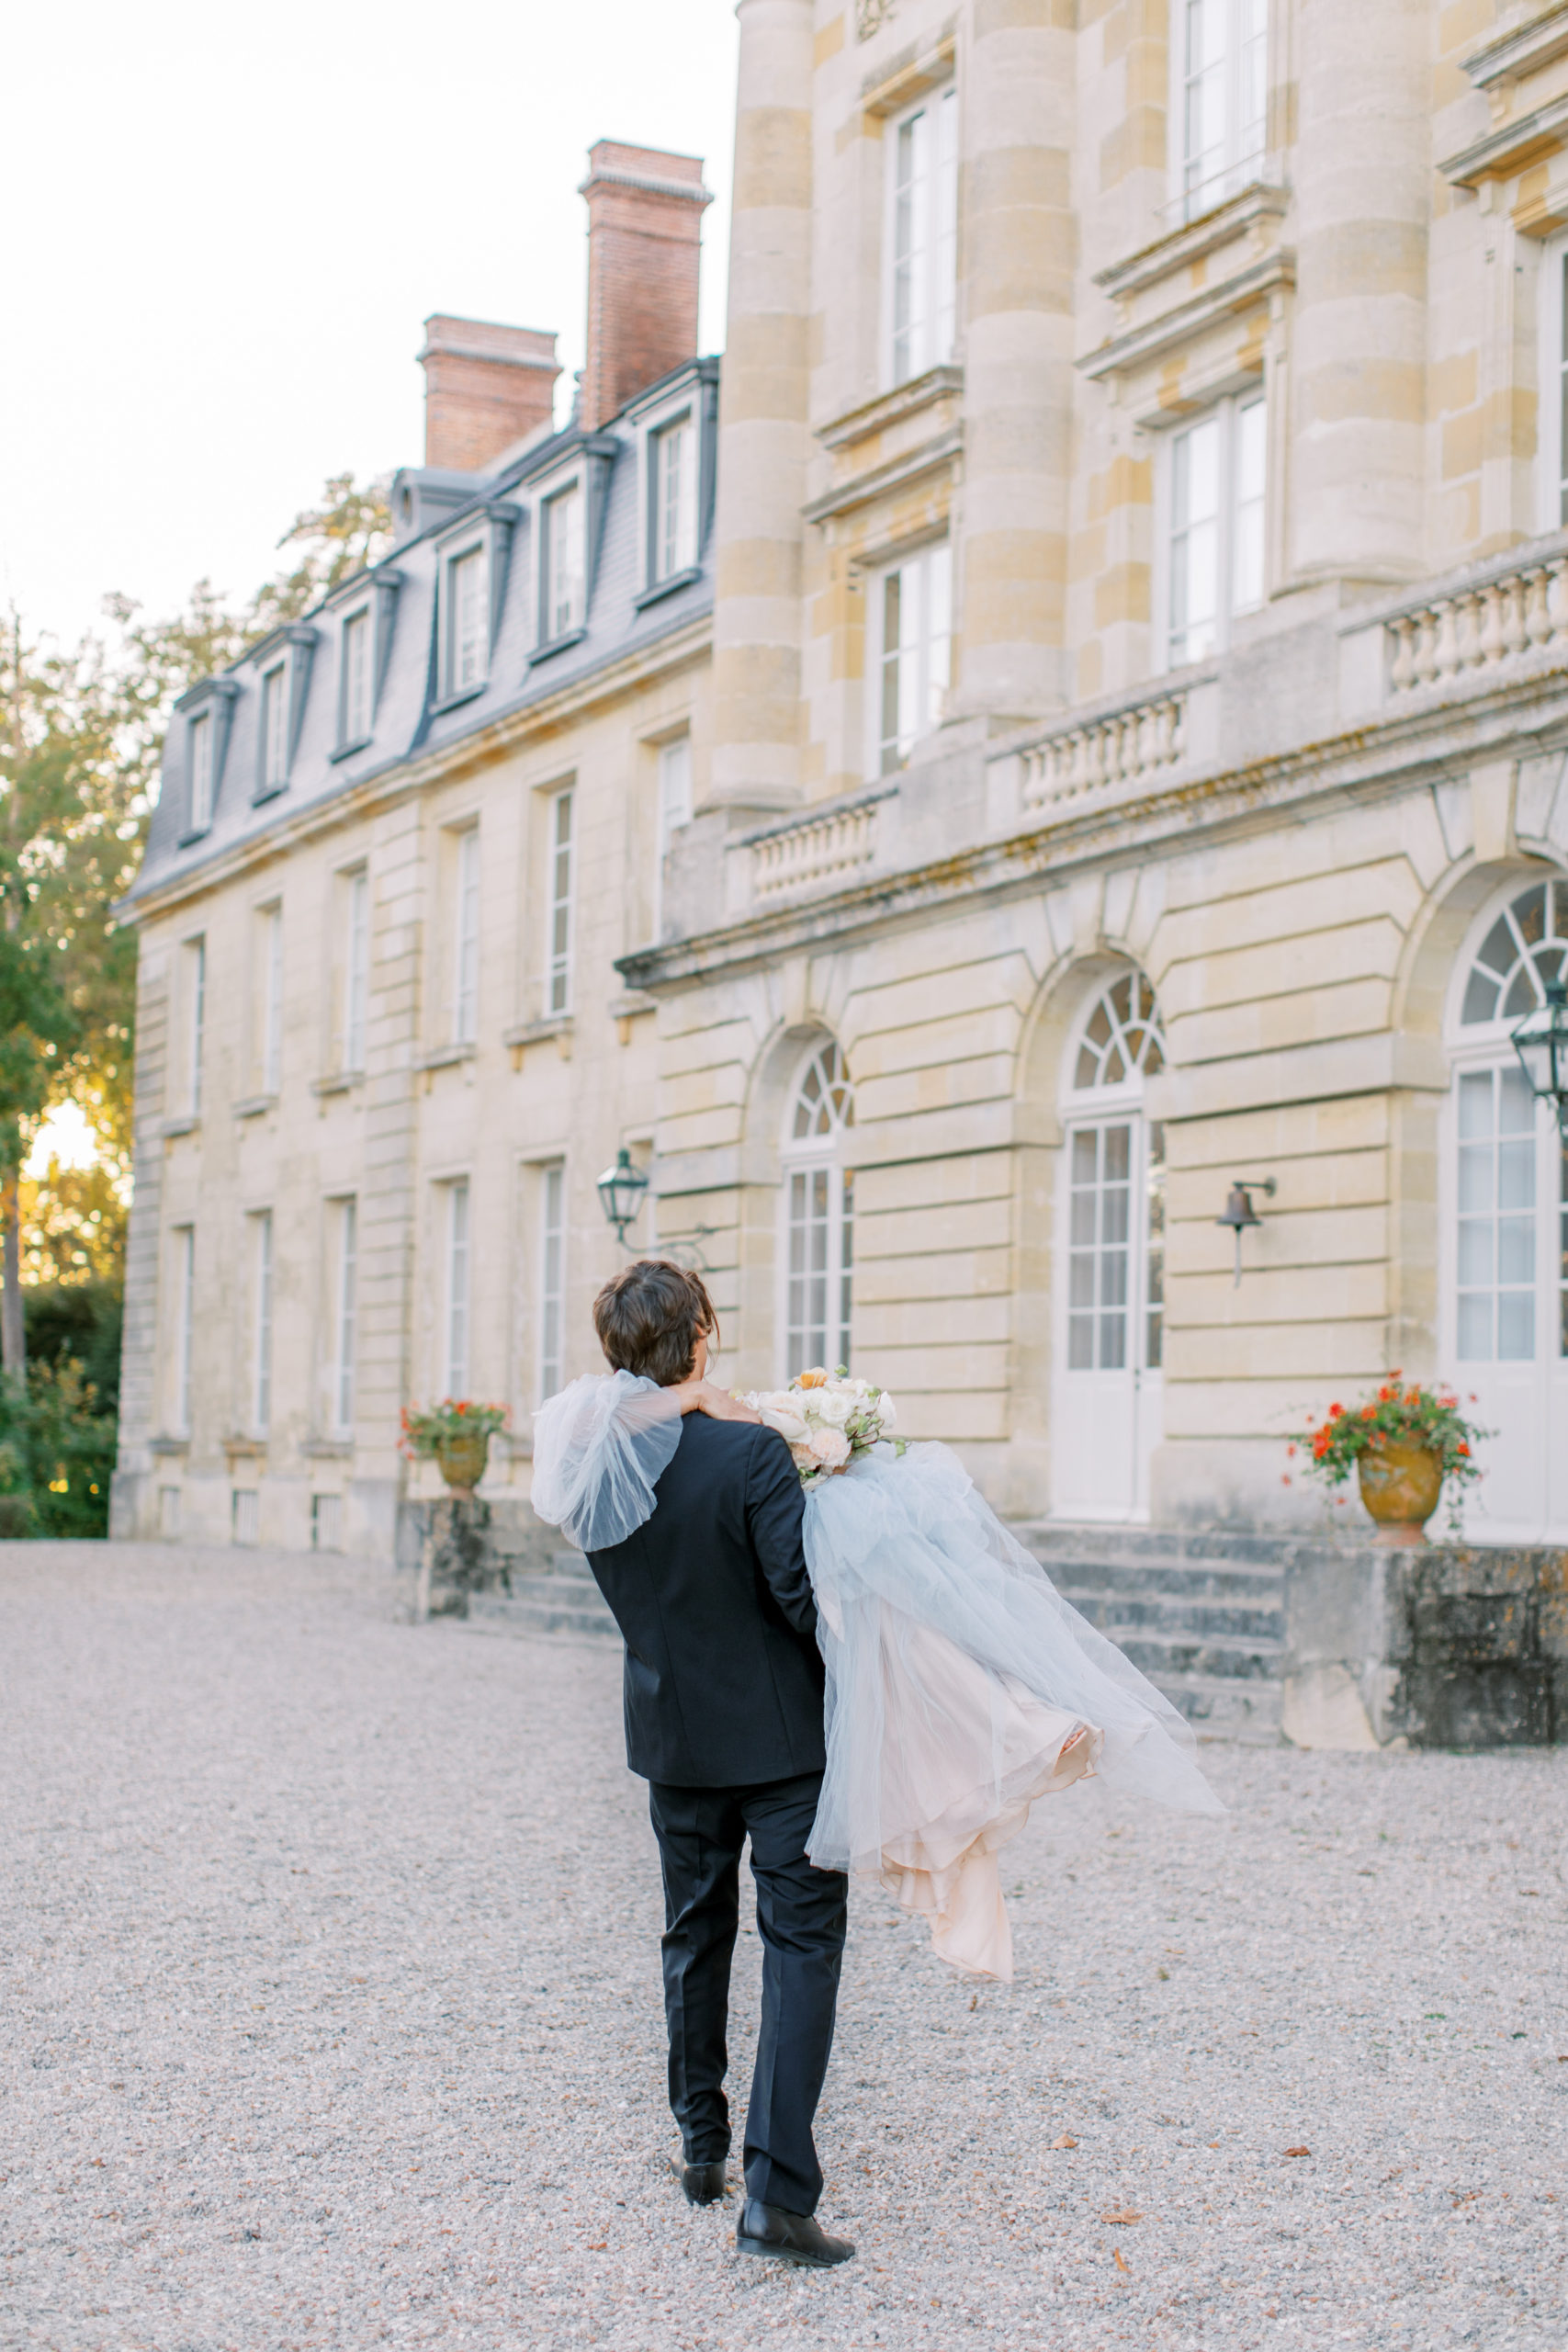 Groom carries bride after Chateau de Courtomer Wedding ceremony